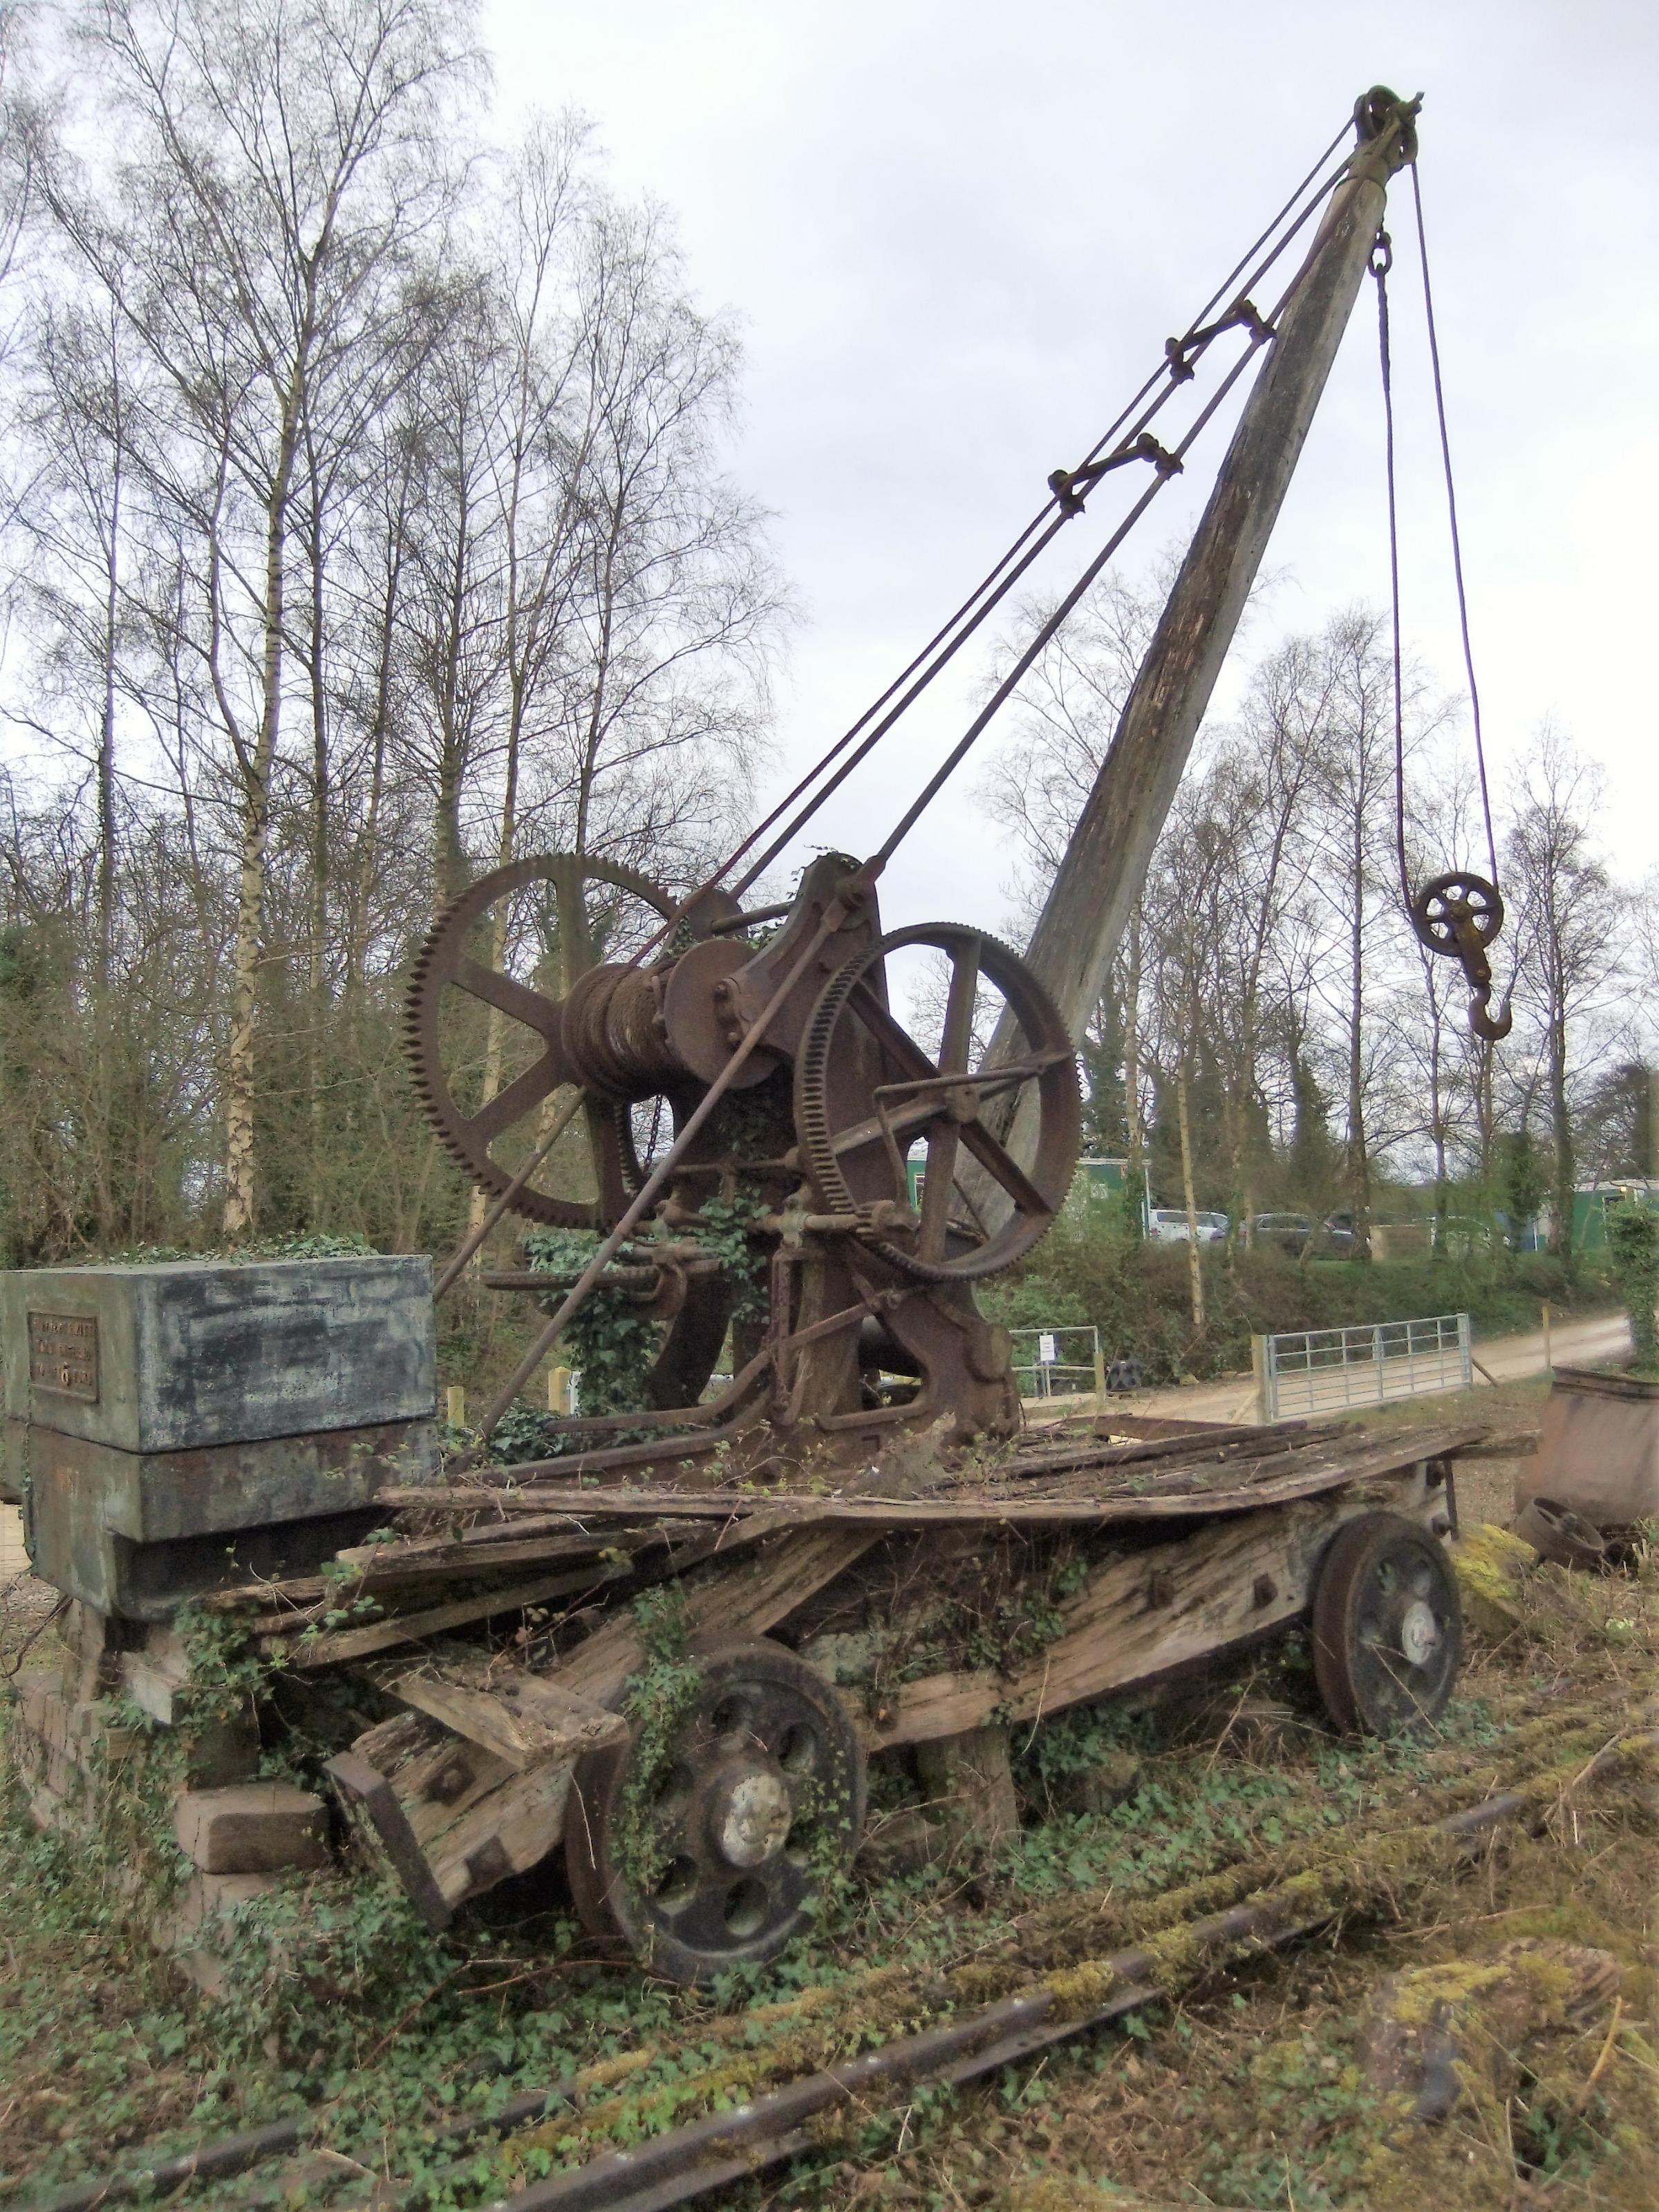 The historic crane in poor condition 